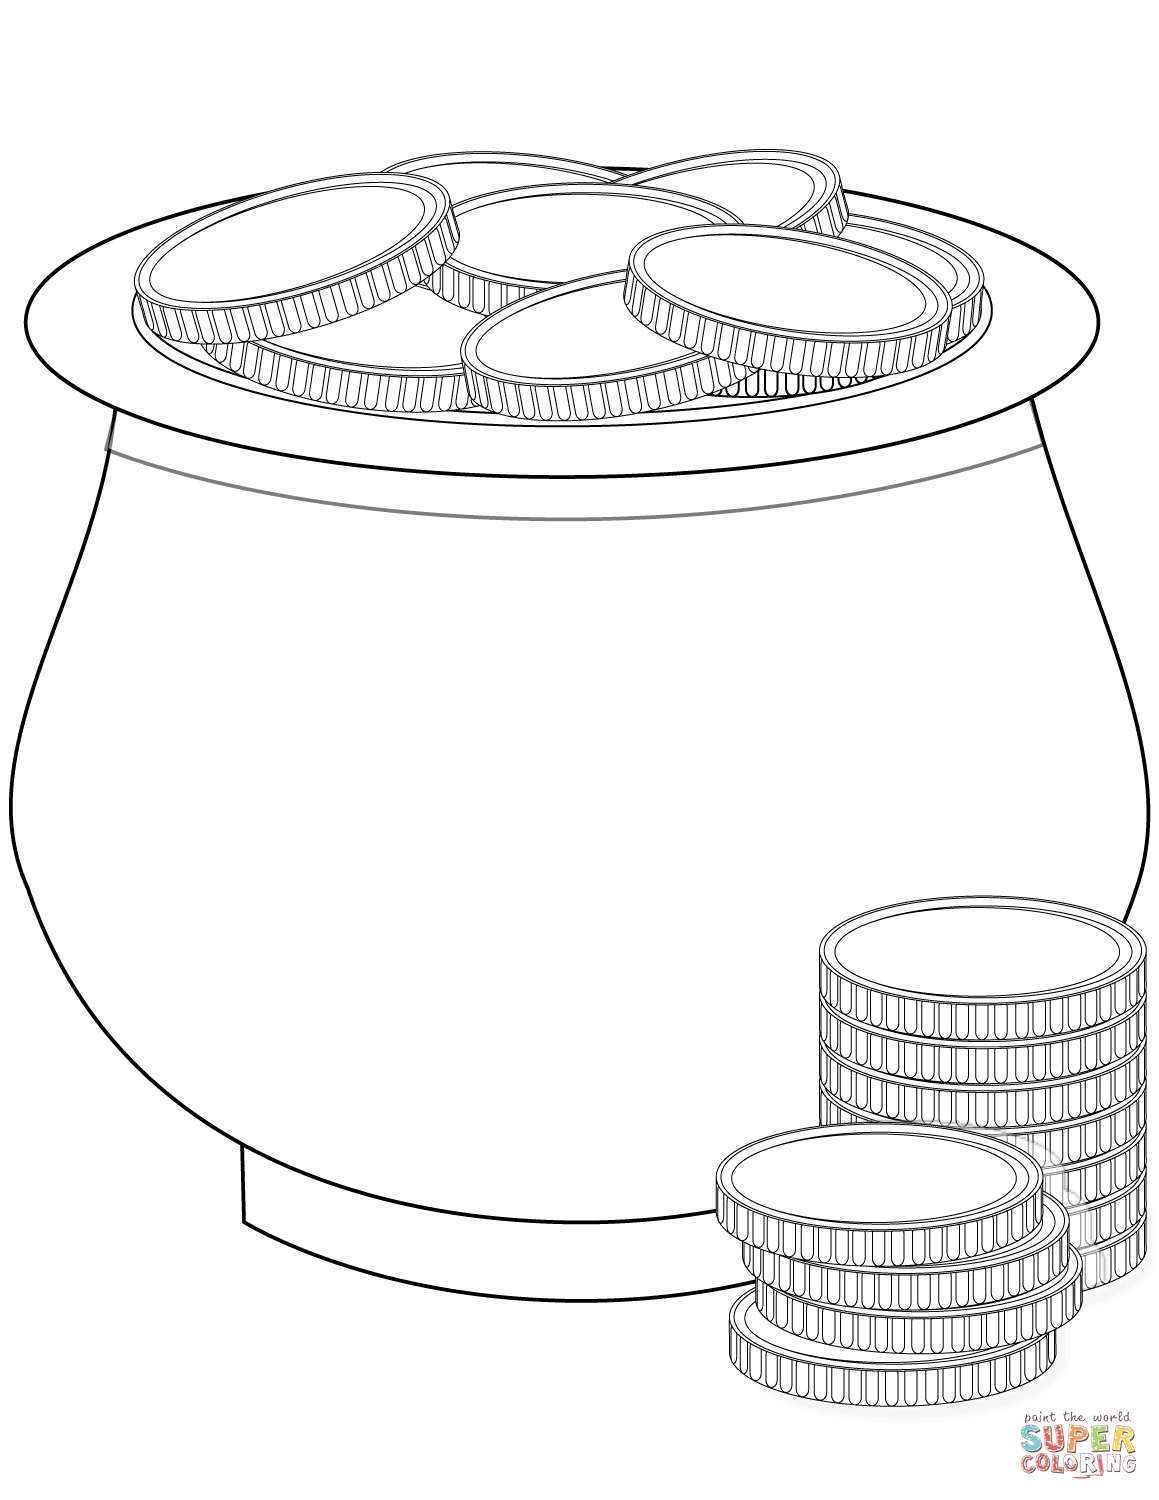 Pot Of Gold Coins Coloring Page | Free Printable Coloring Pages - Free Printable Pot Of Gold Coloring Pages